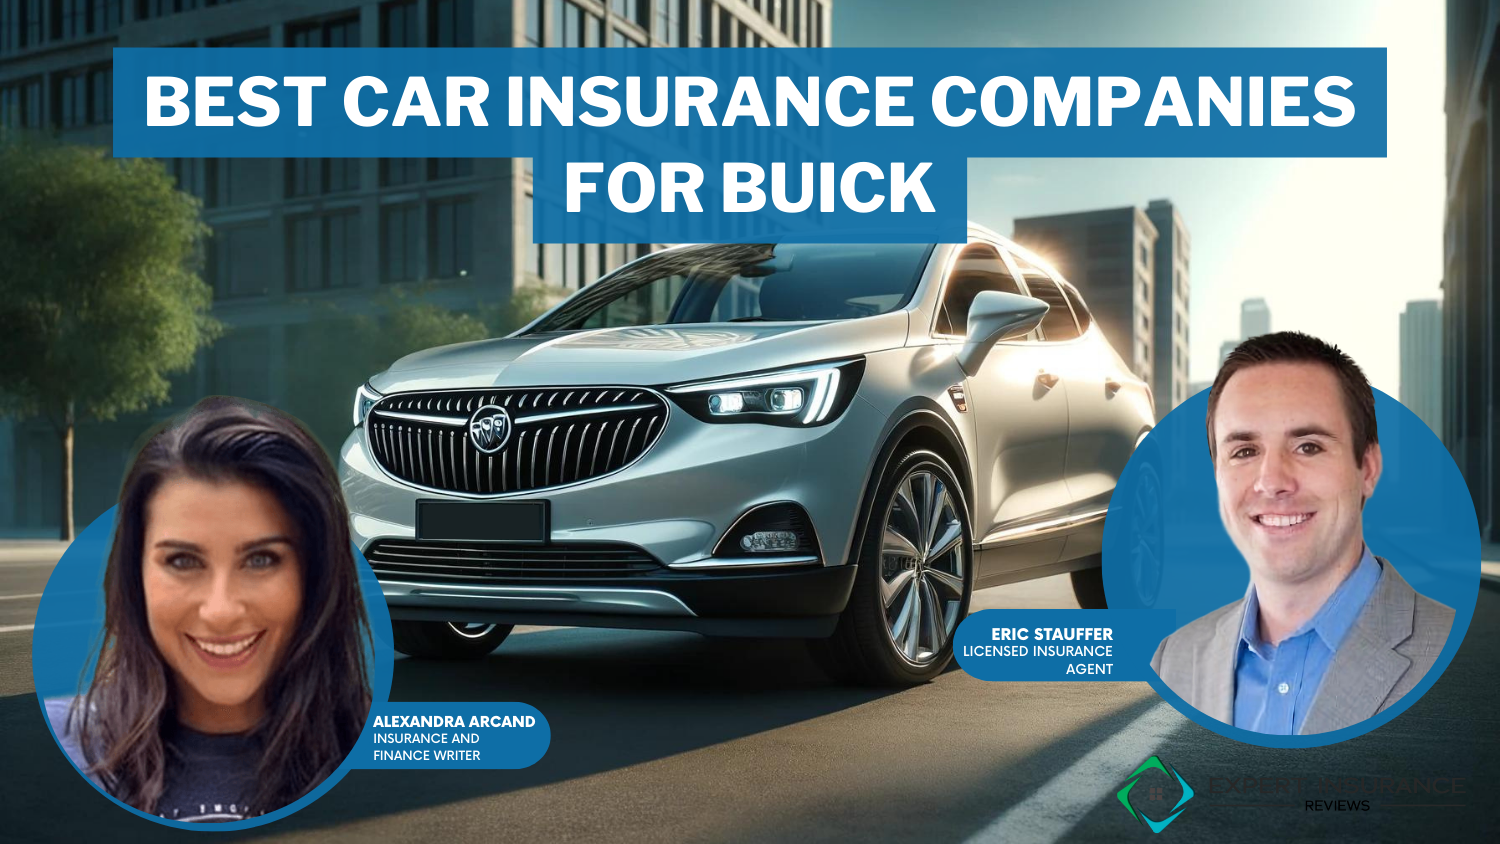 10 Best Car Insurance Companies for Buicks: State Farm, Geico, and Progressive